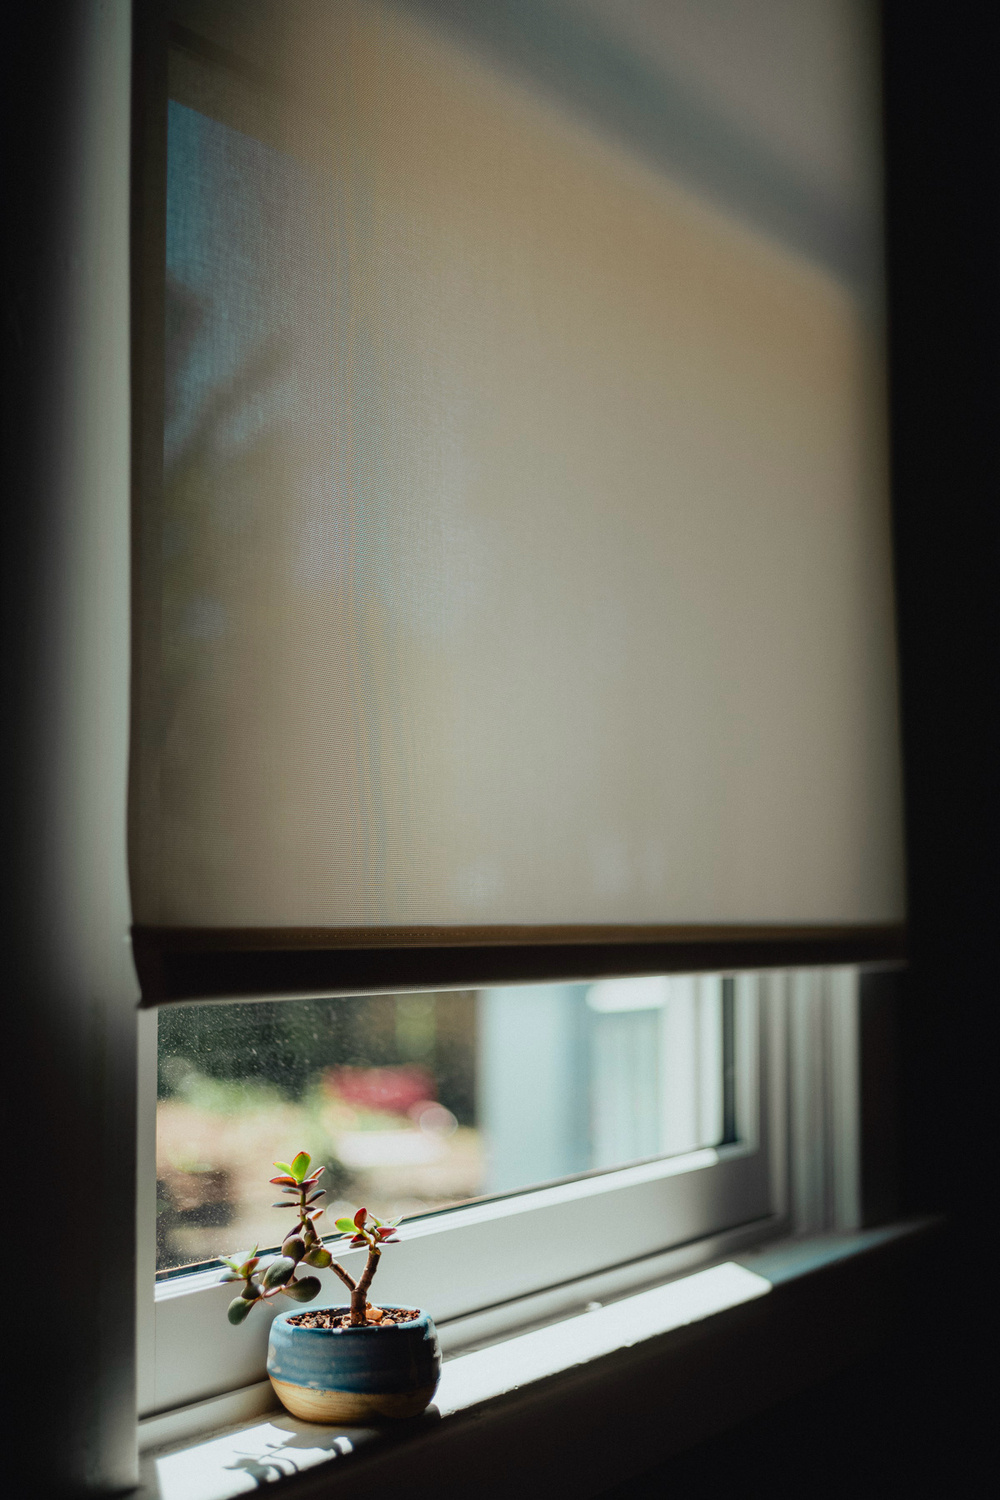 A small potted succulent sits on a windowsill with soft sunlight filtering through a lowered window blind. The focus is on the plant, with the background gently blurred. The scene has a calm and serene atmosphere.